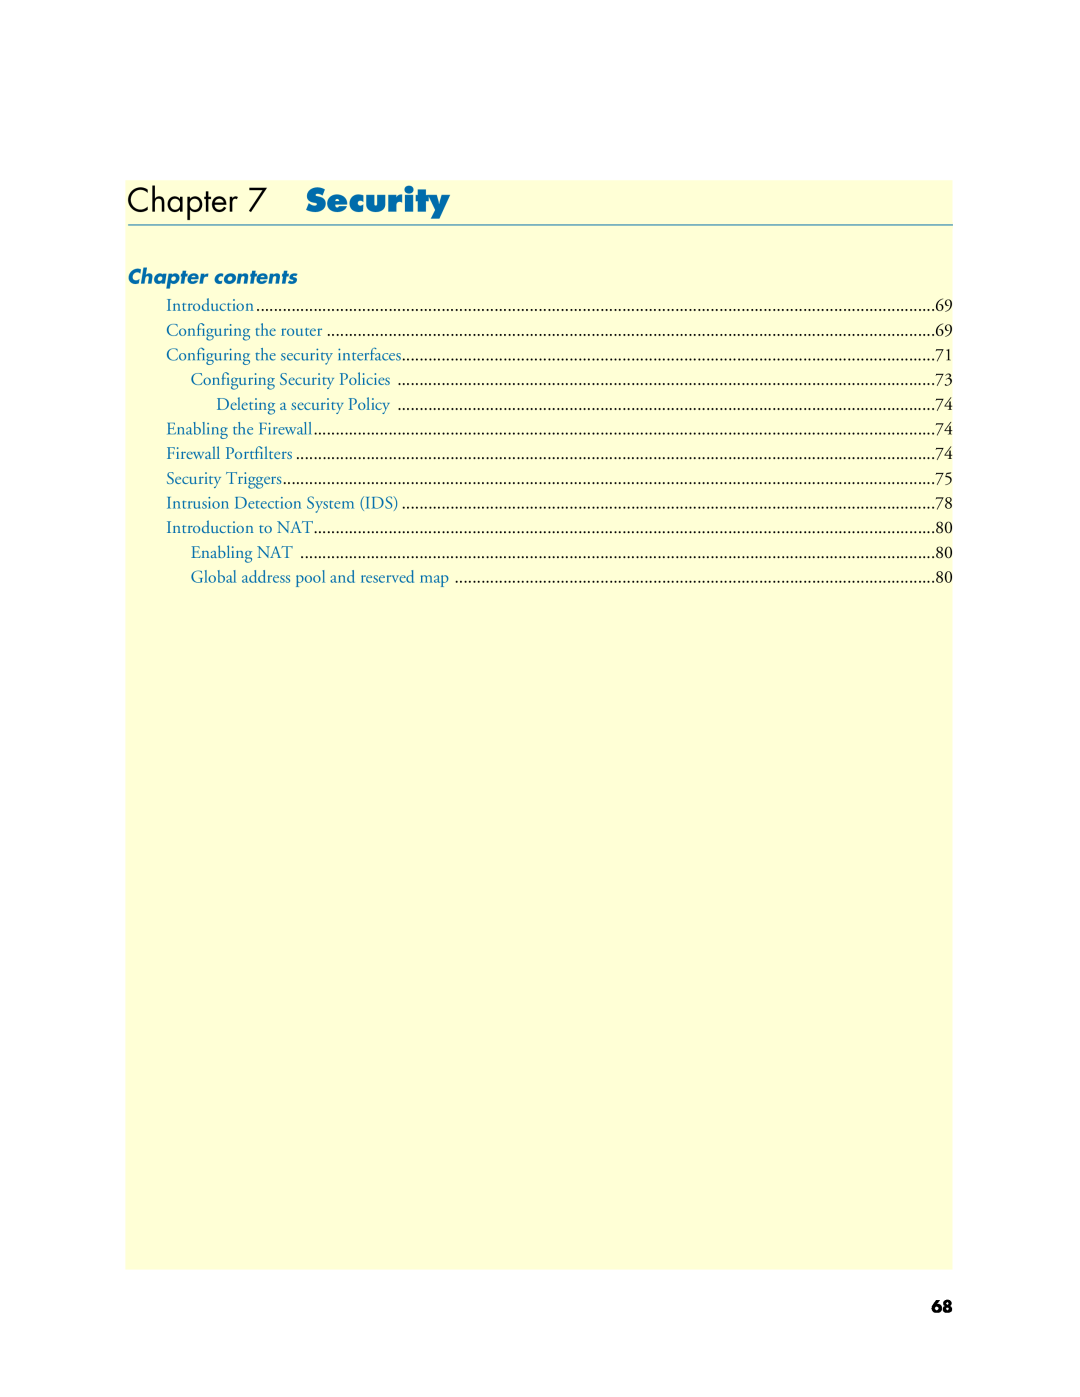 Patton electronic 2621, 2635 manual Security, Chapter contents 